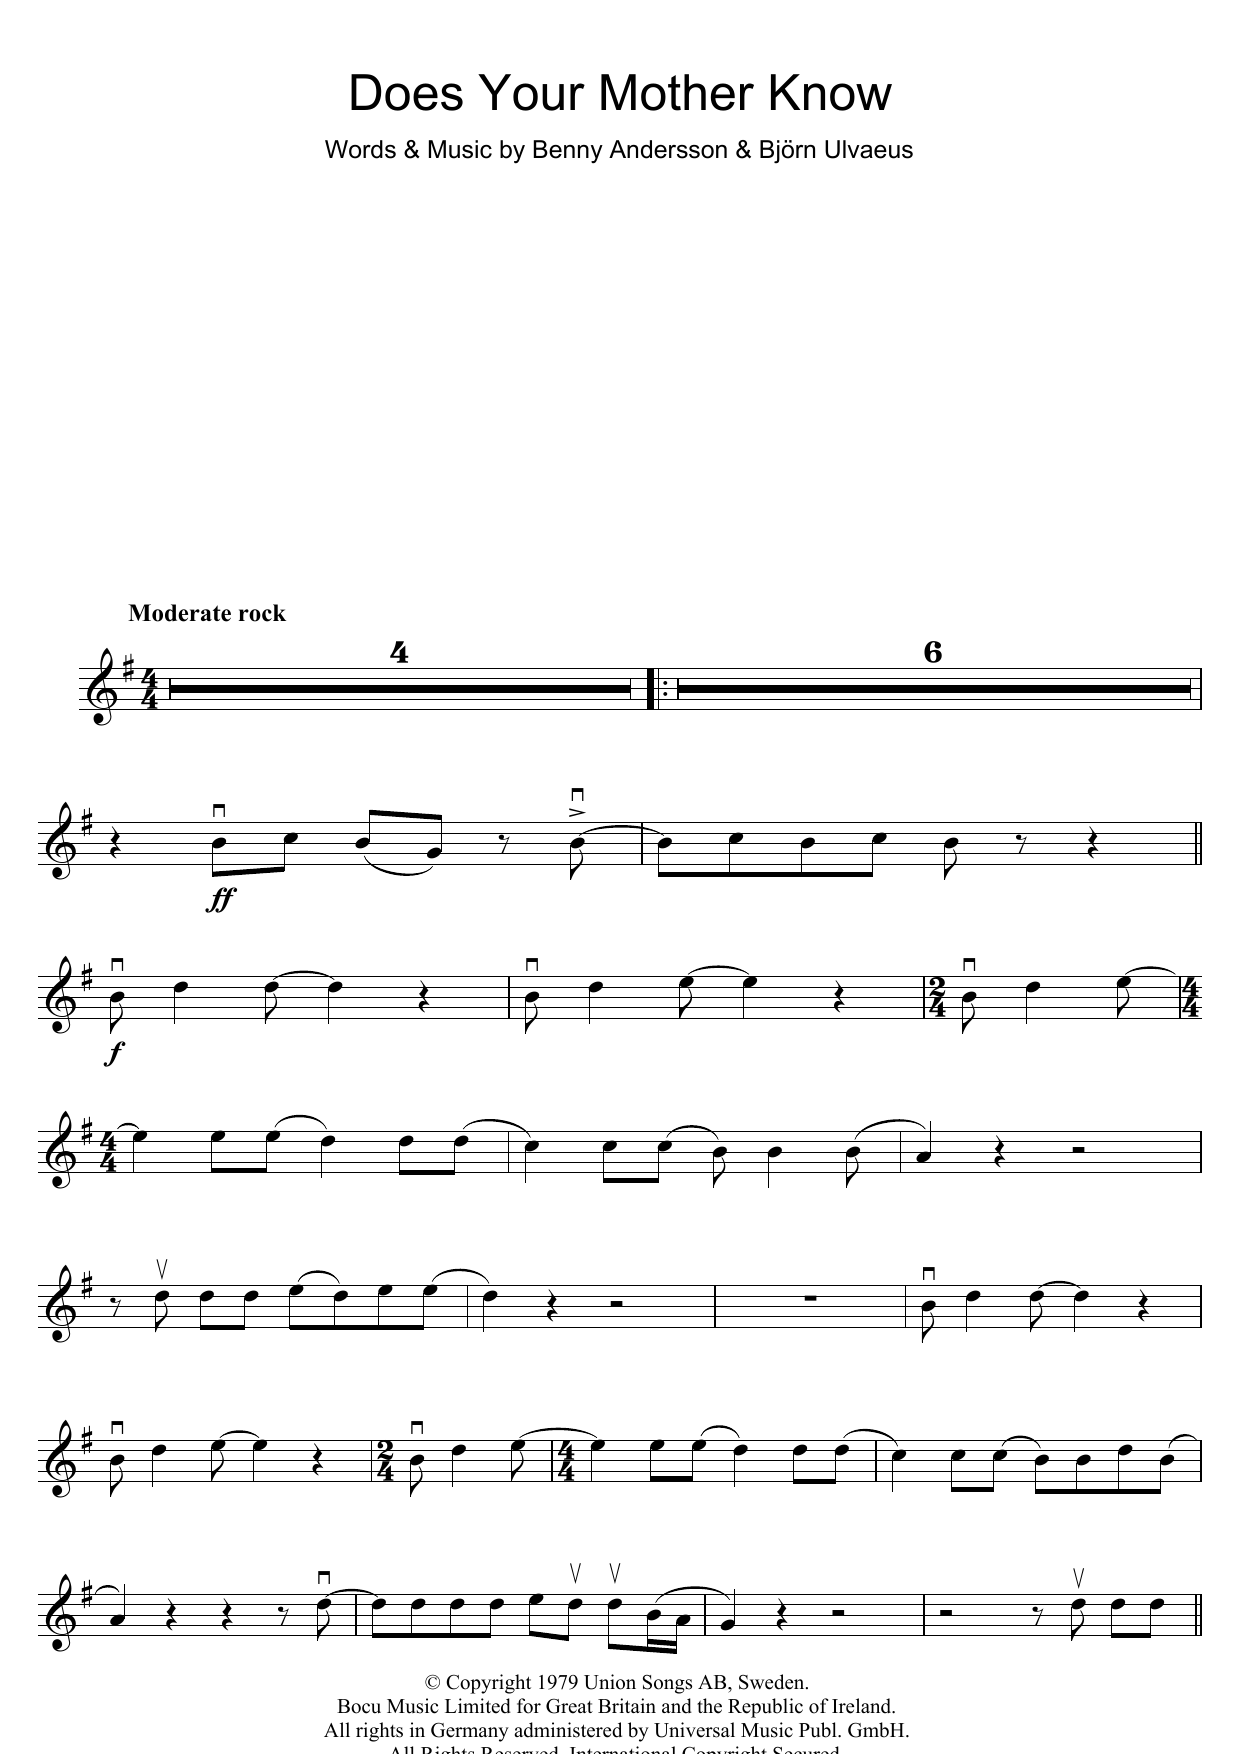 Download ABBA Does Your Mother Know Sheet Music